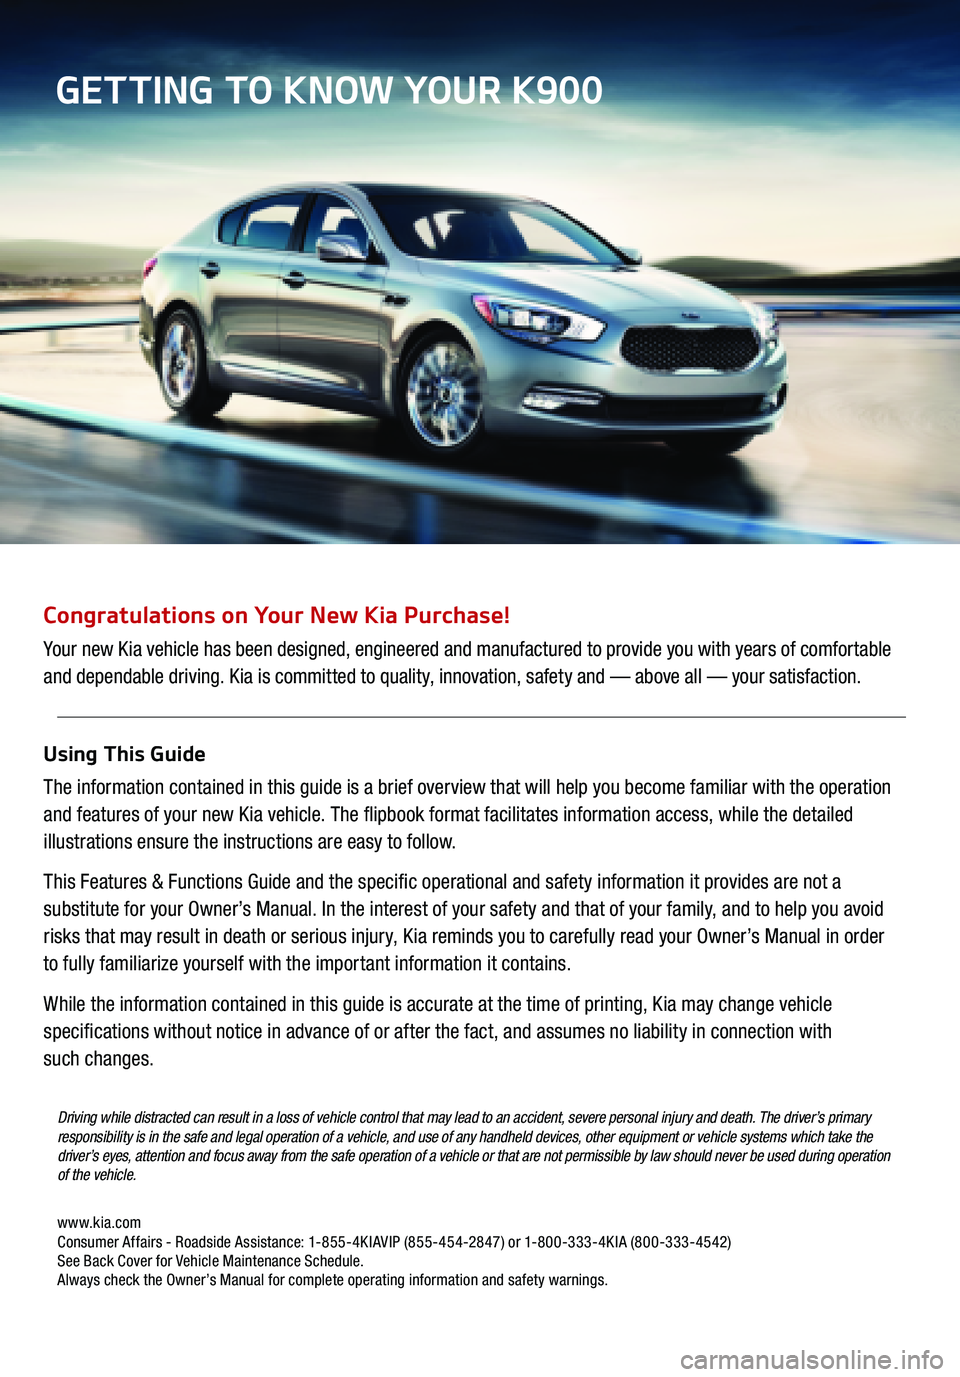 KIA K900 2016  Features and Functions Guide  Congratulations on Your New Kia Purchase!
Your new Kia vehicle has been designed, engineered and manufactured to provide you with years of comfortable  
and dependable driving. Kia is committed to qu